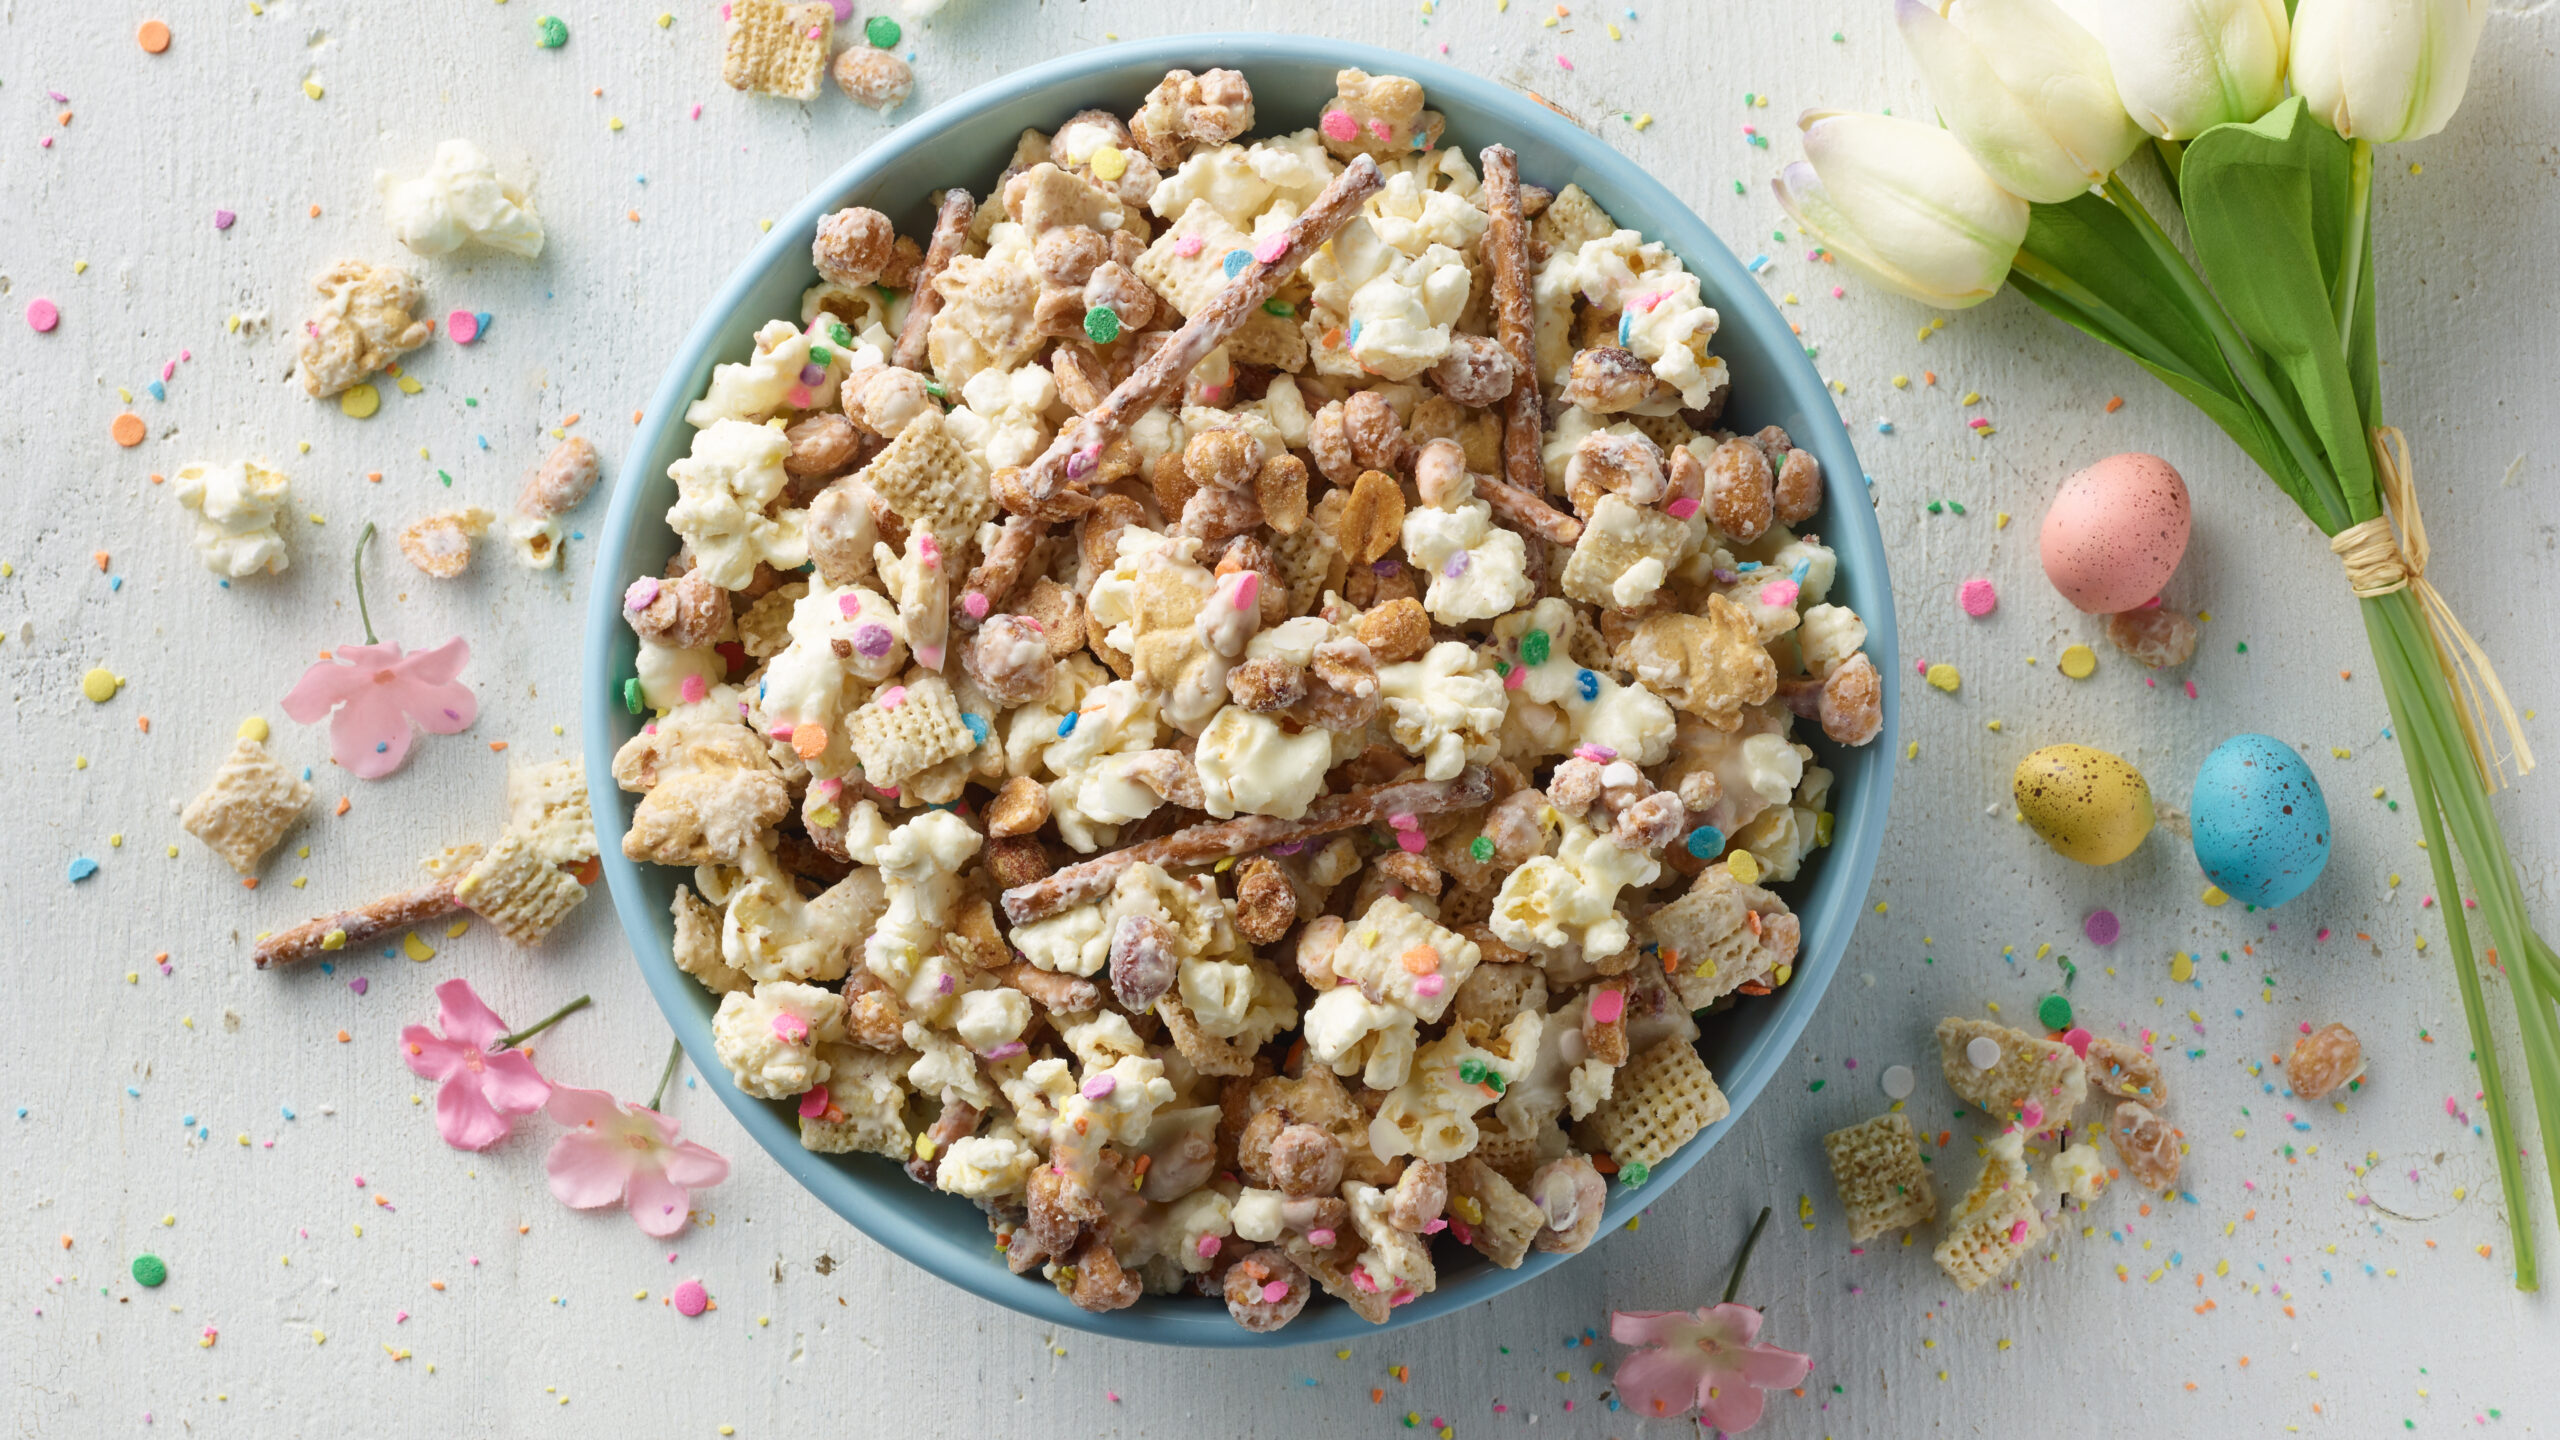 Overhead view of a spring-themed snack mix, with easter eggs, tulilps and confetti